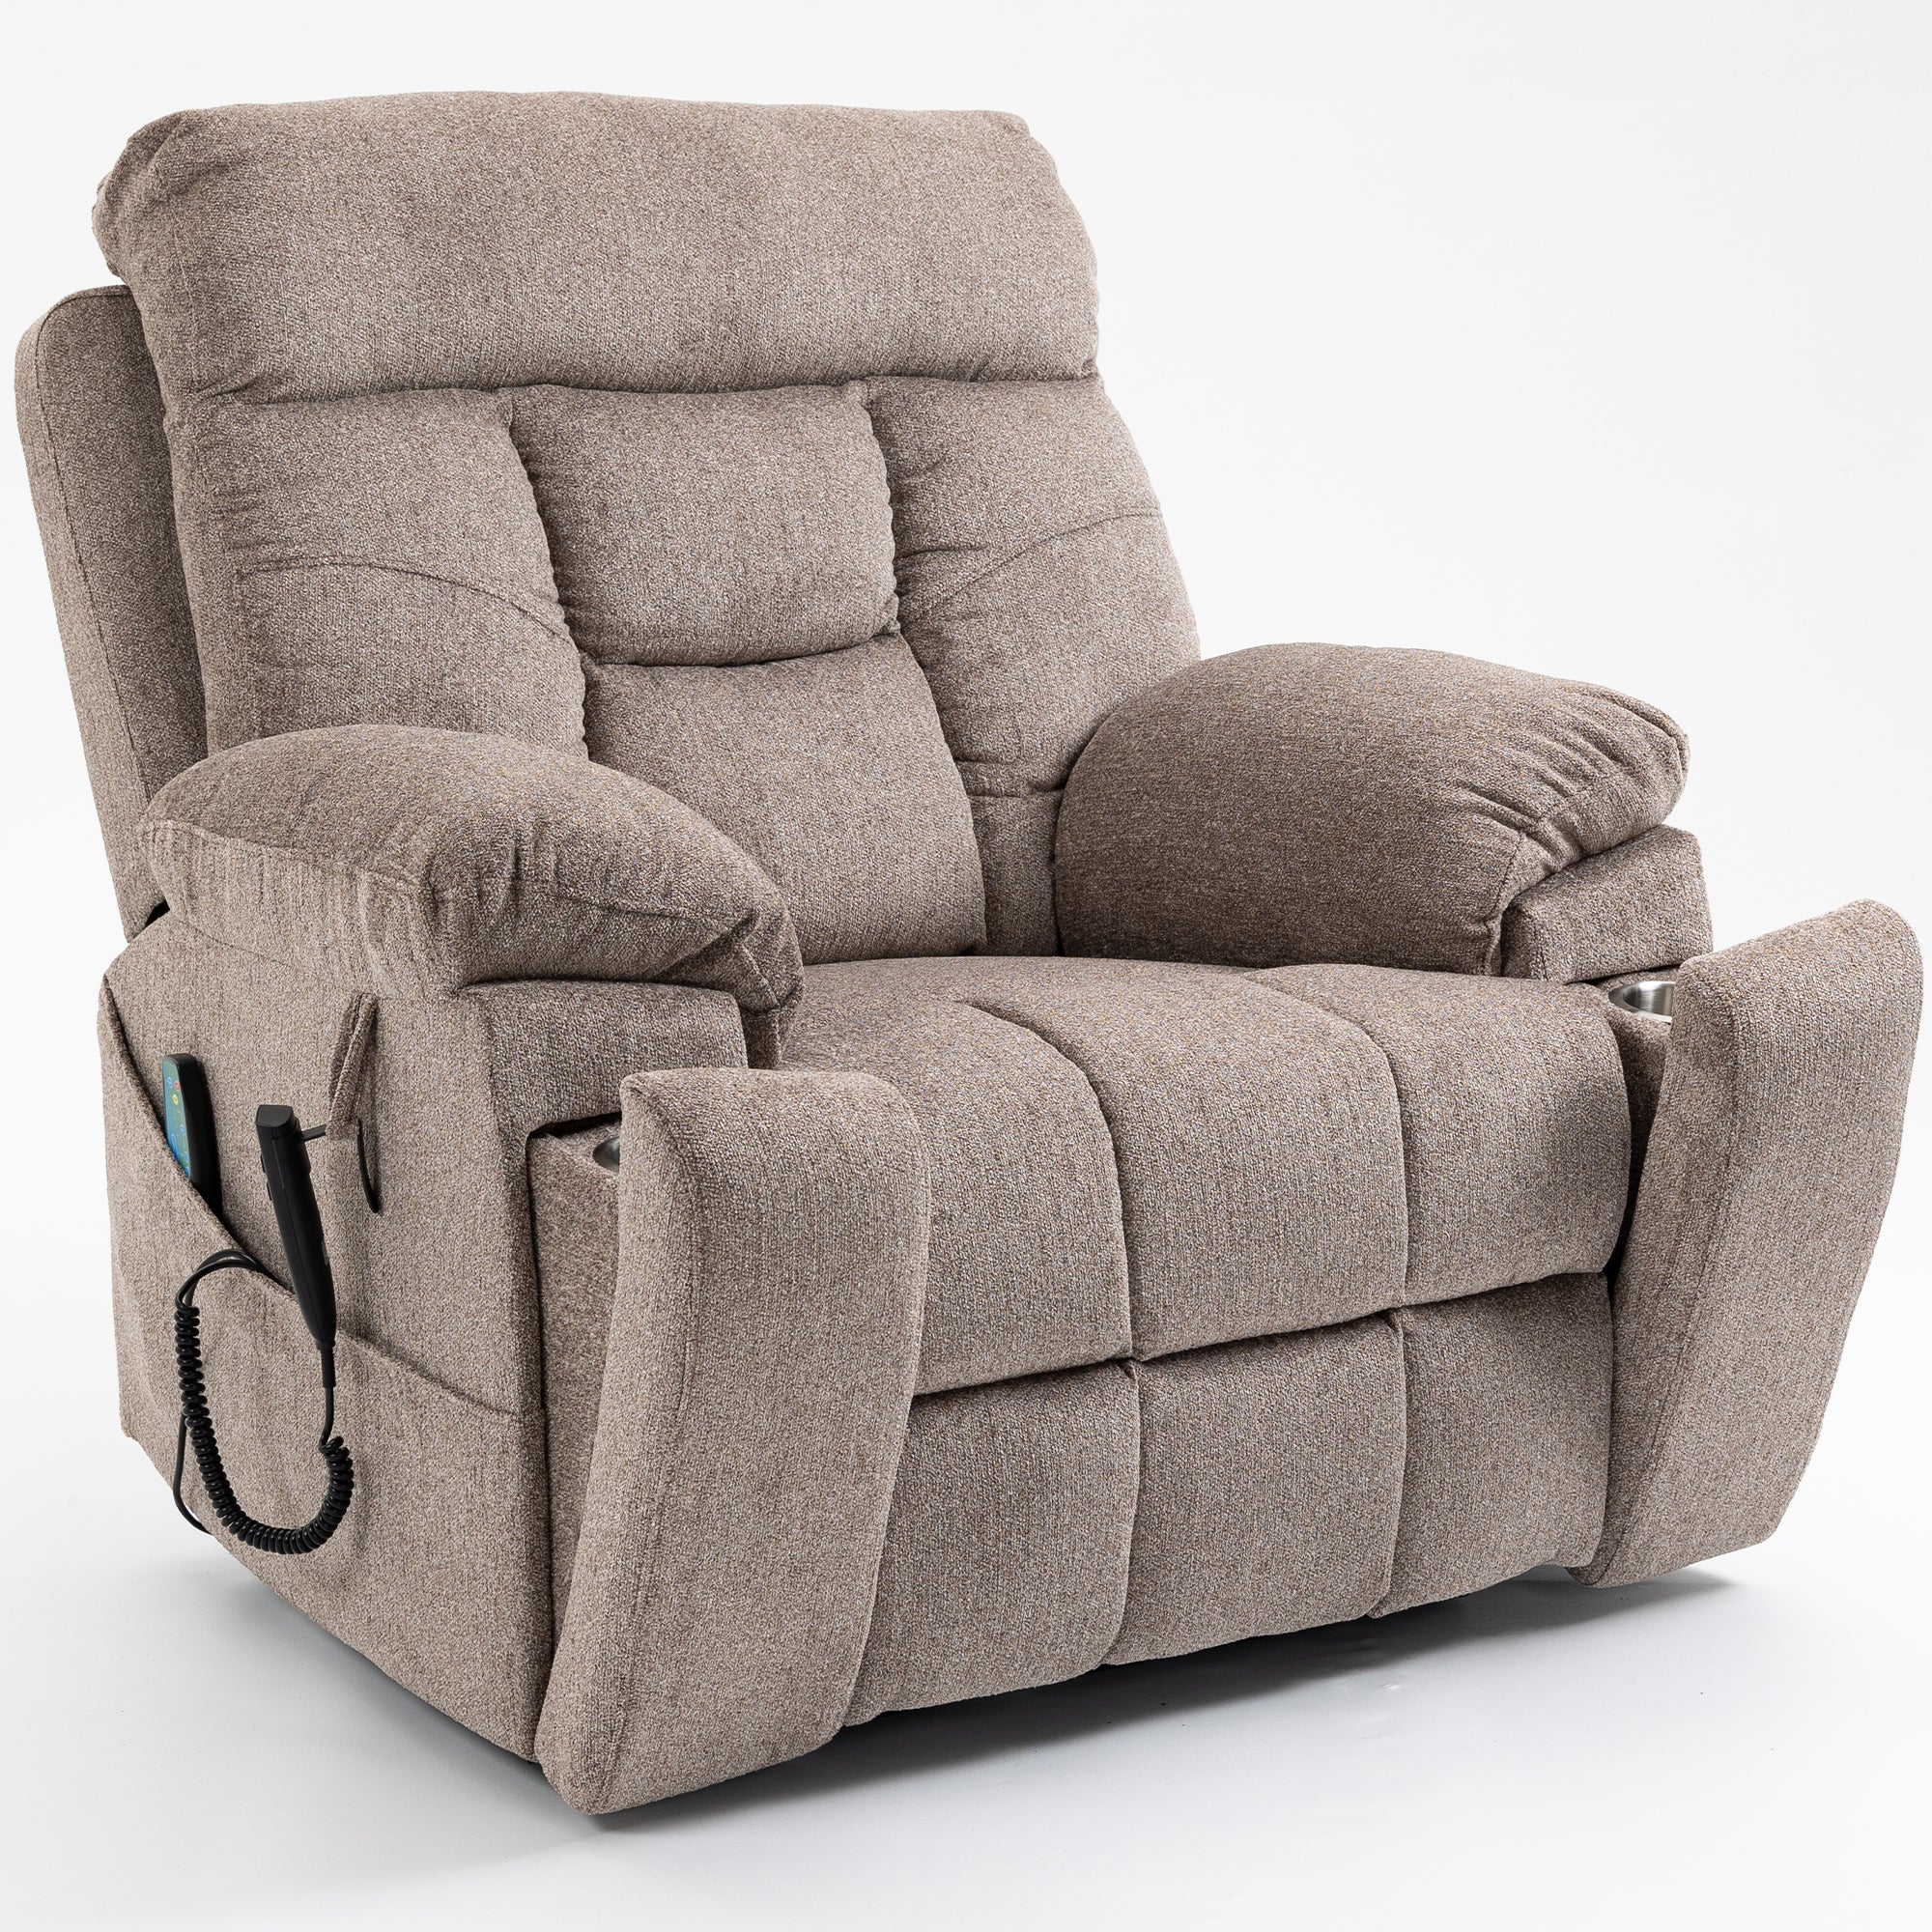 uhomepro Large Electric Massage Recliner with Heat, Velvet Lift